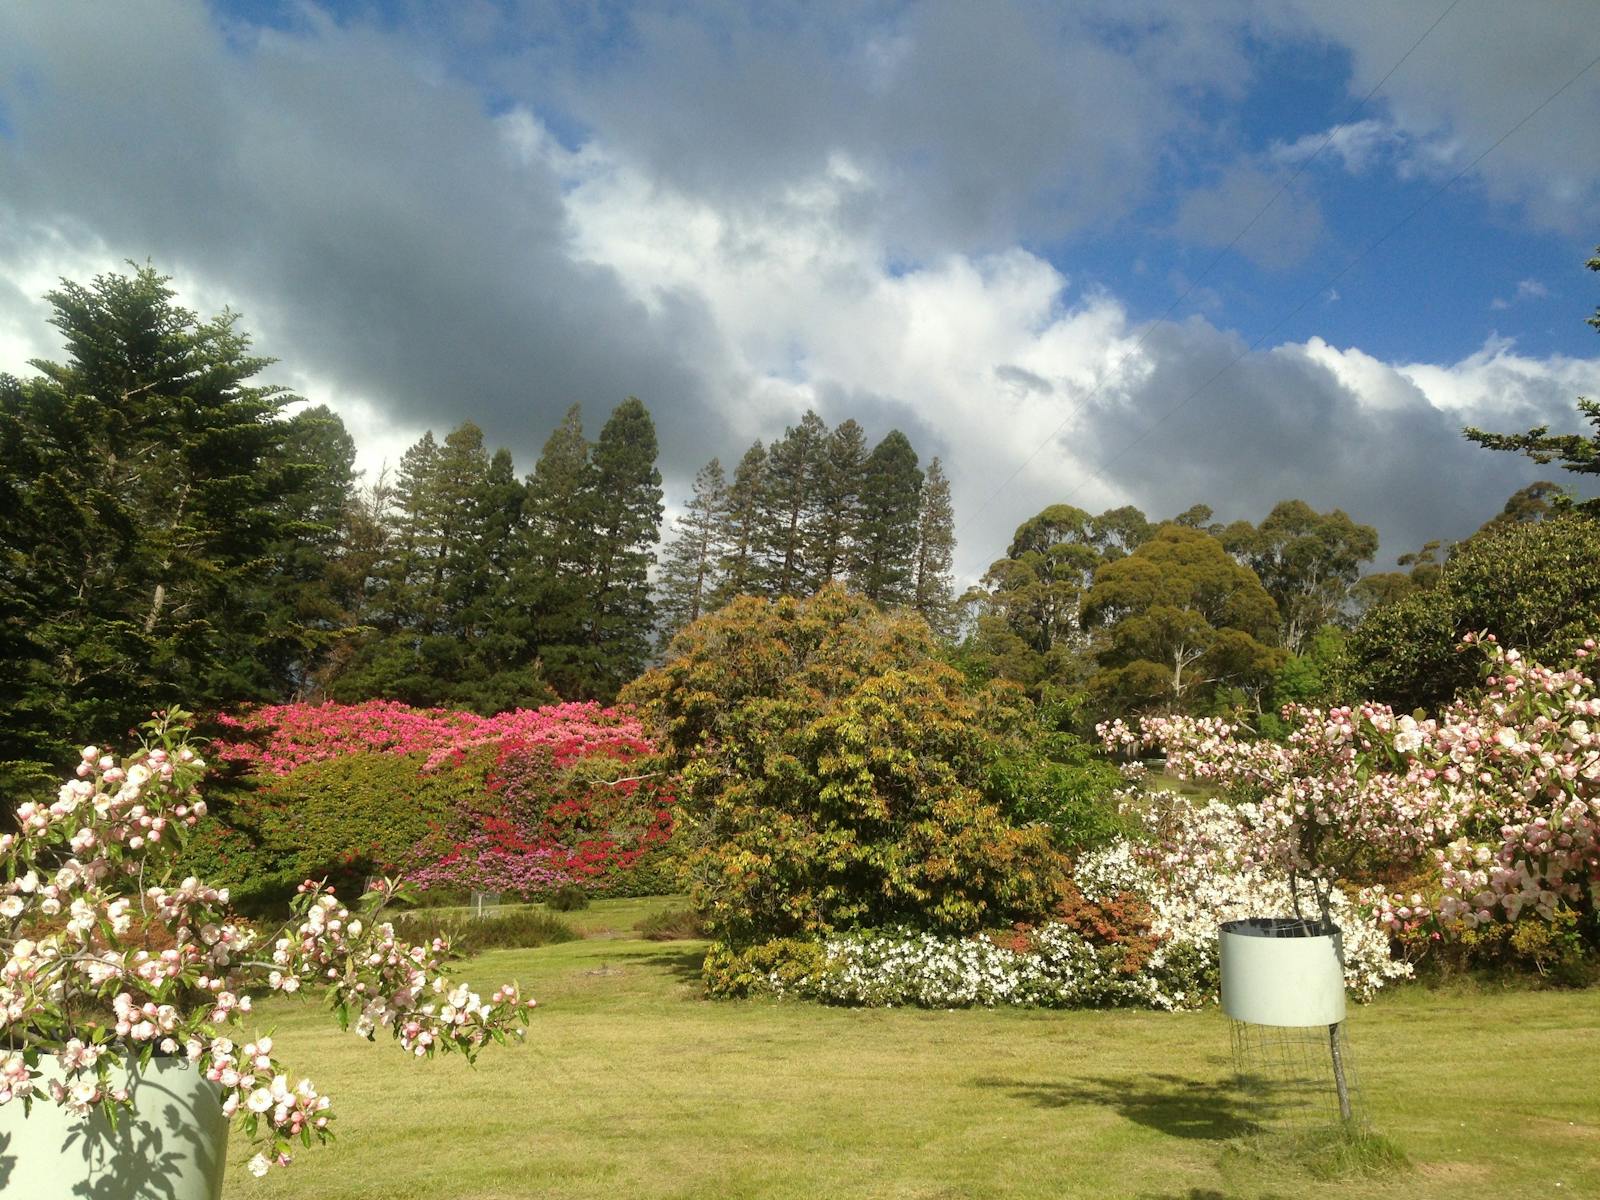 Rows of heritage rhododendrons , some 8m in height, are possibly the oldest and largest in Australia